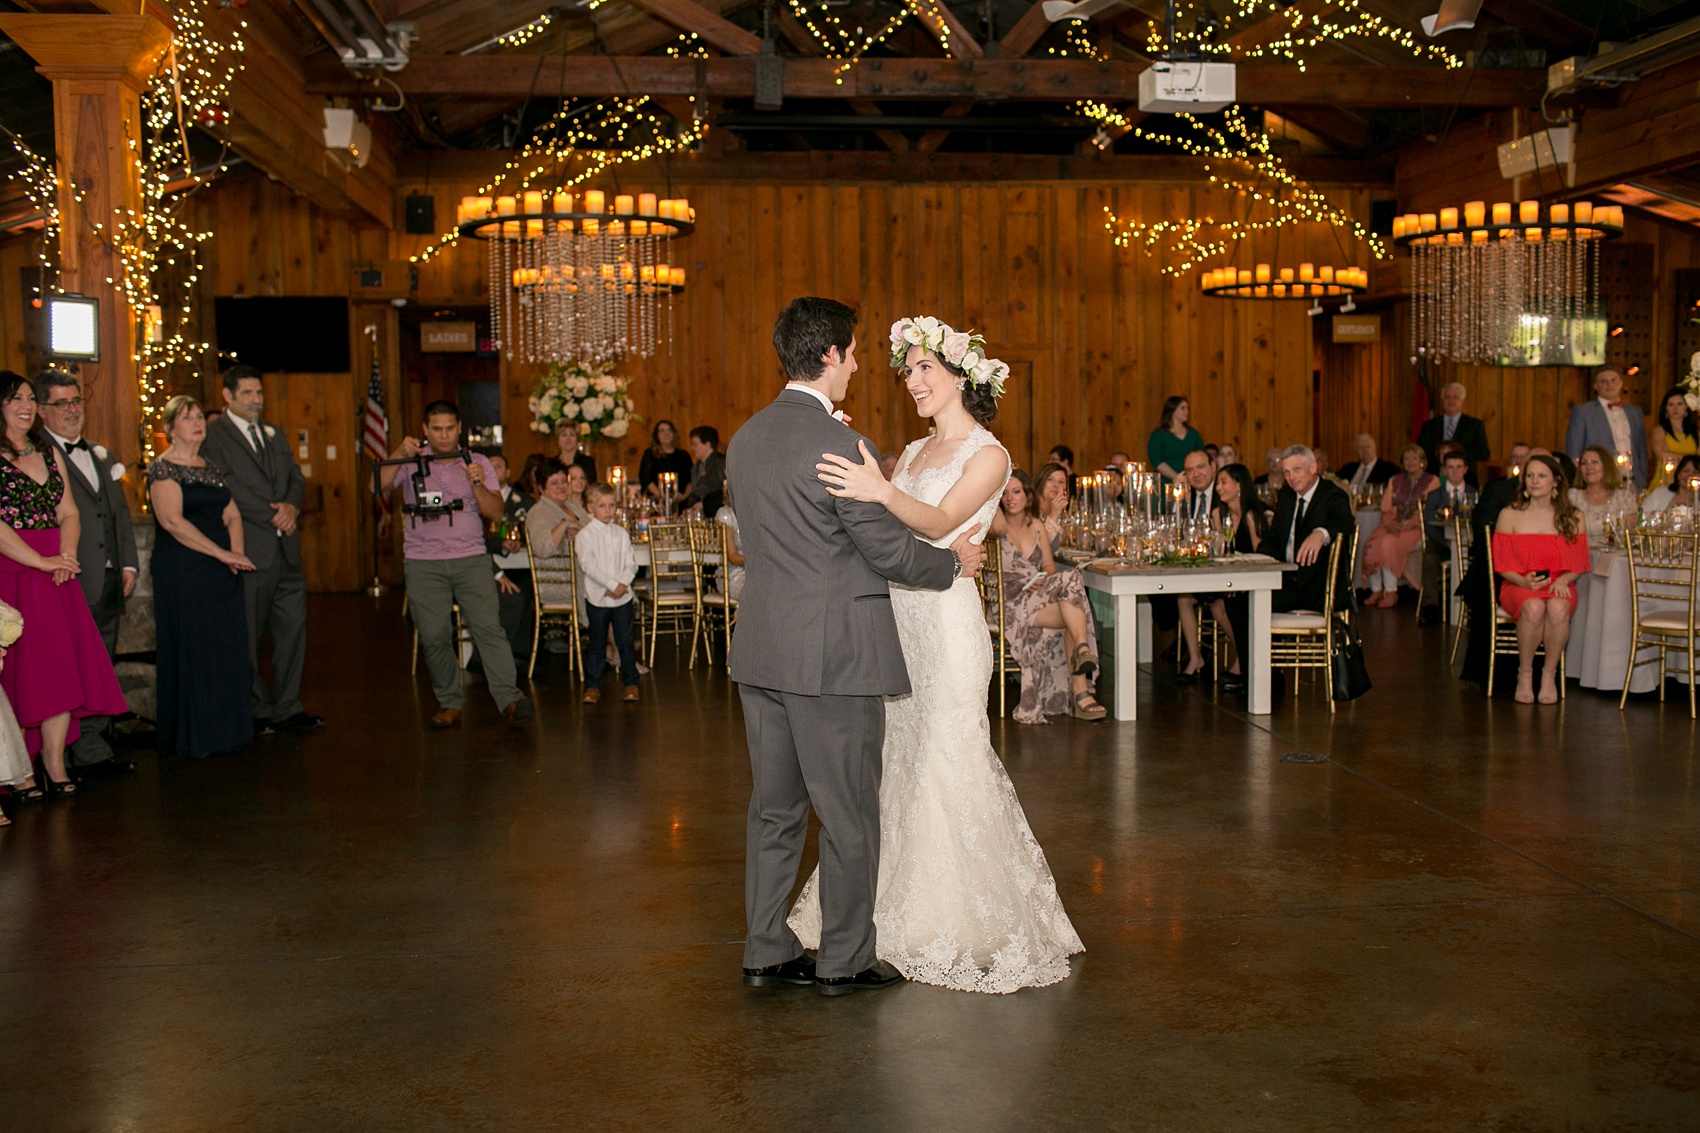 Pavilion at Angus Barn wedding photos by Mikkel Paige Photography. Picture of the bride and groom during their first dance.